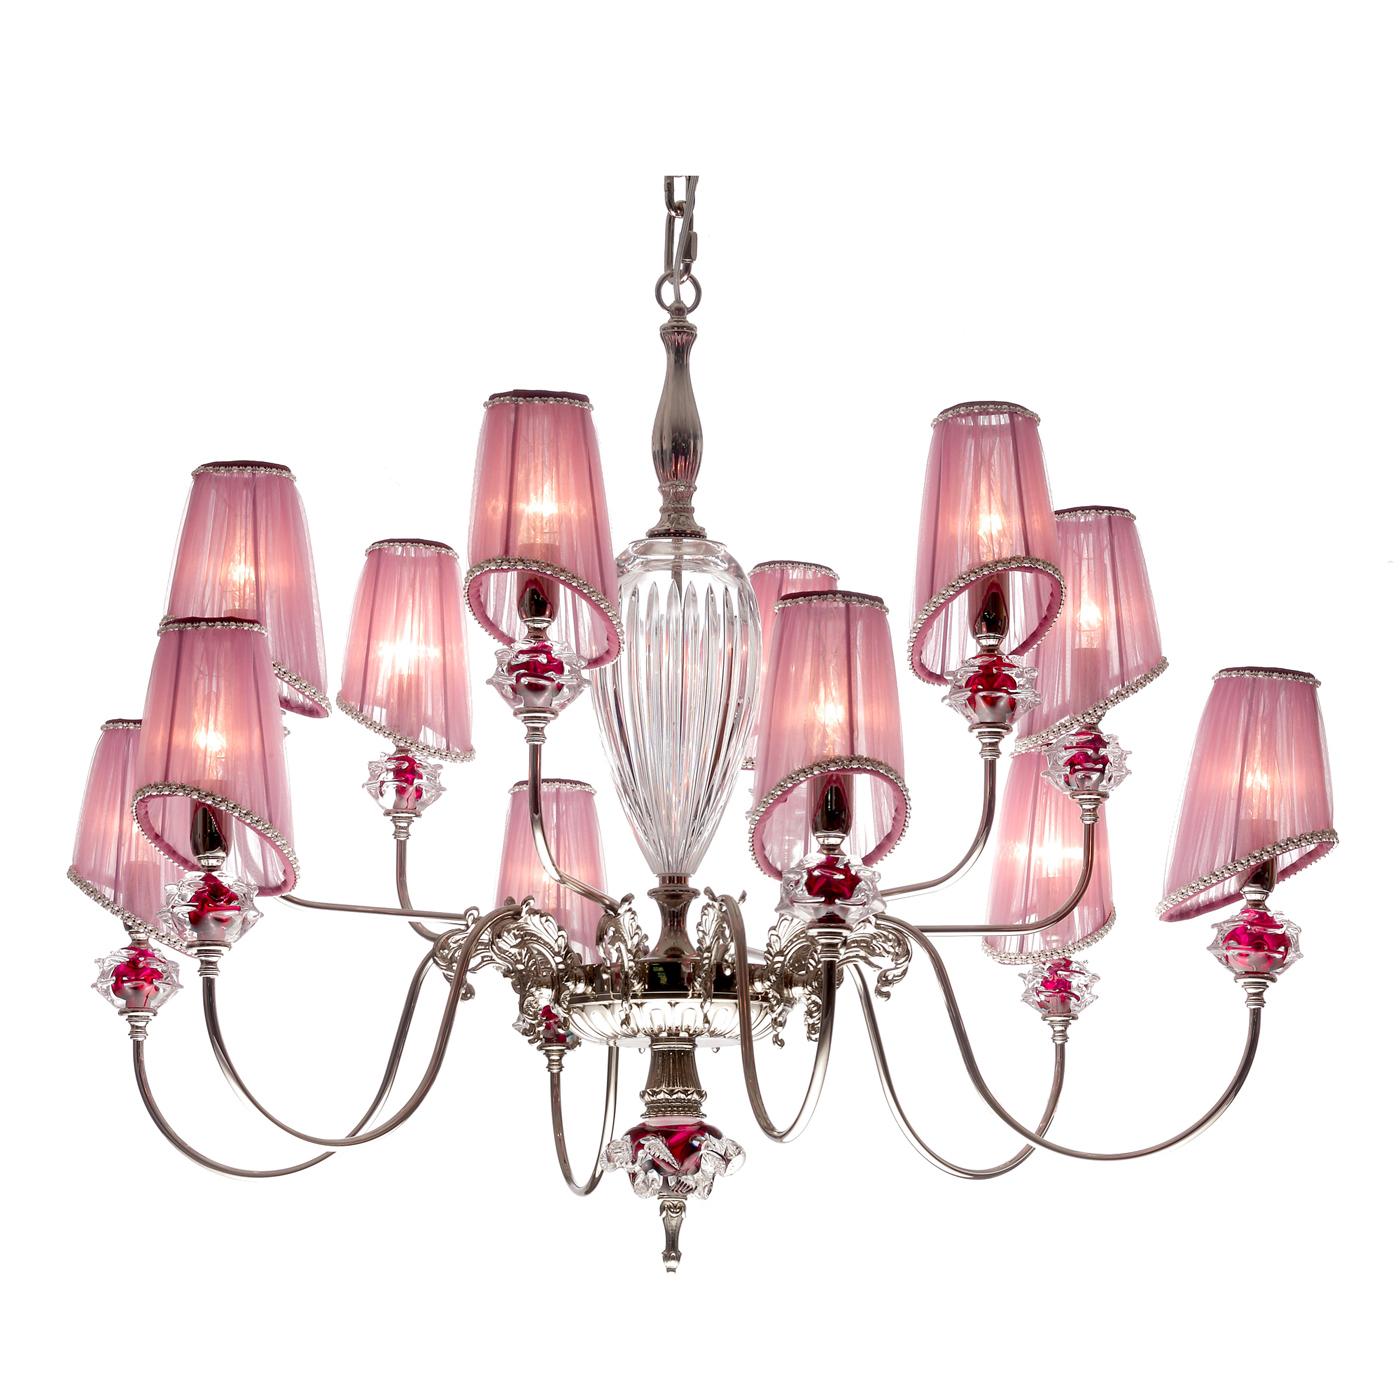 A perfect mix of majesty and refinement characterizes this 12 lights chandelier in pink shades. A play of lights and reflections, thanks to the rounded lines and the arrangement of the 12 arms. This chandelier adapts perfectly to a traditional and